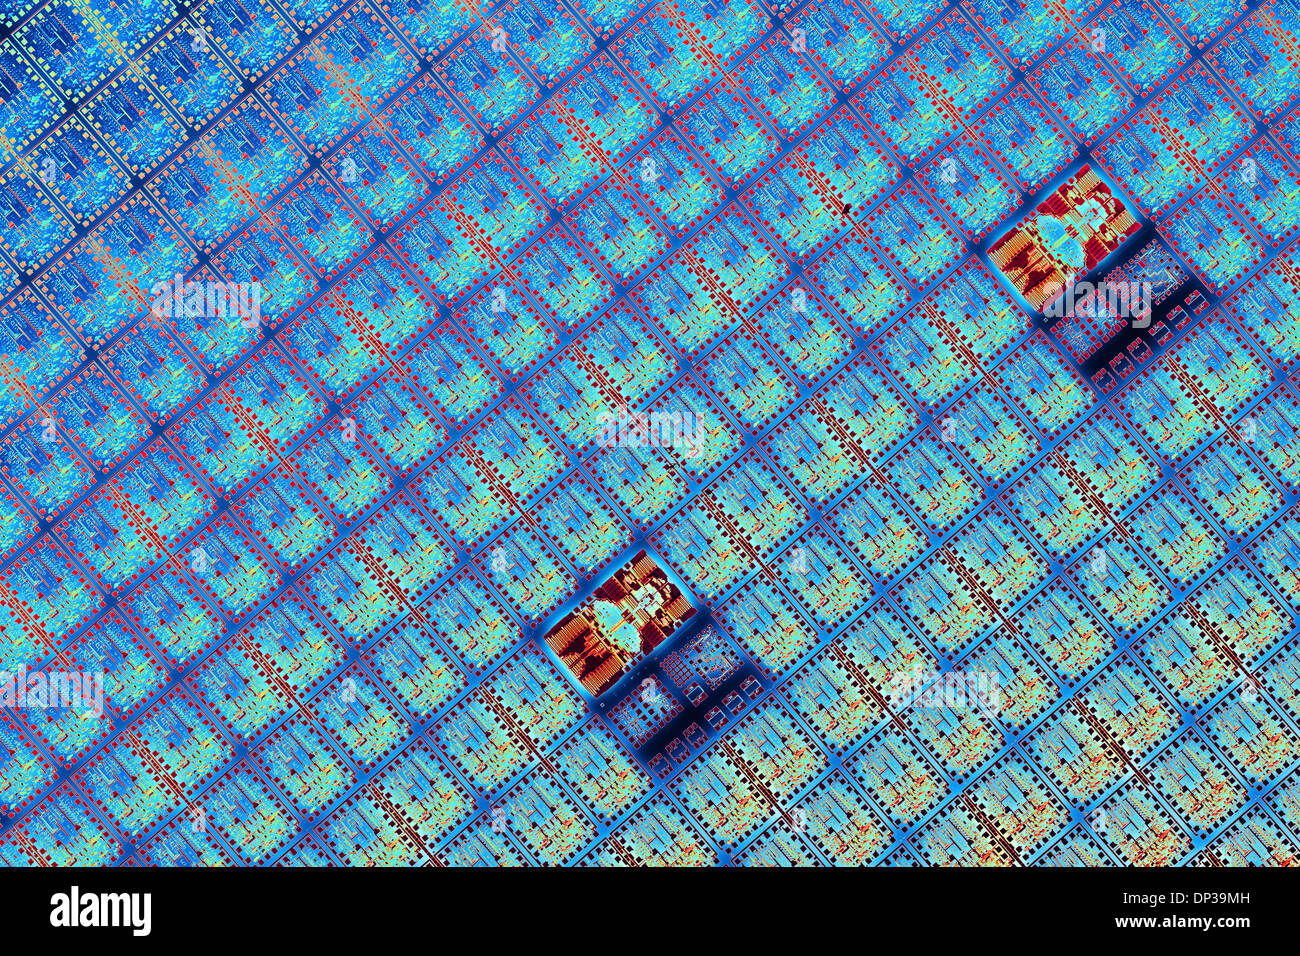 Semiconductor wafer, artwork Stock Photo